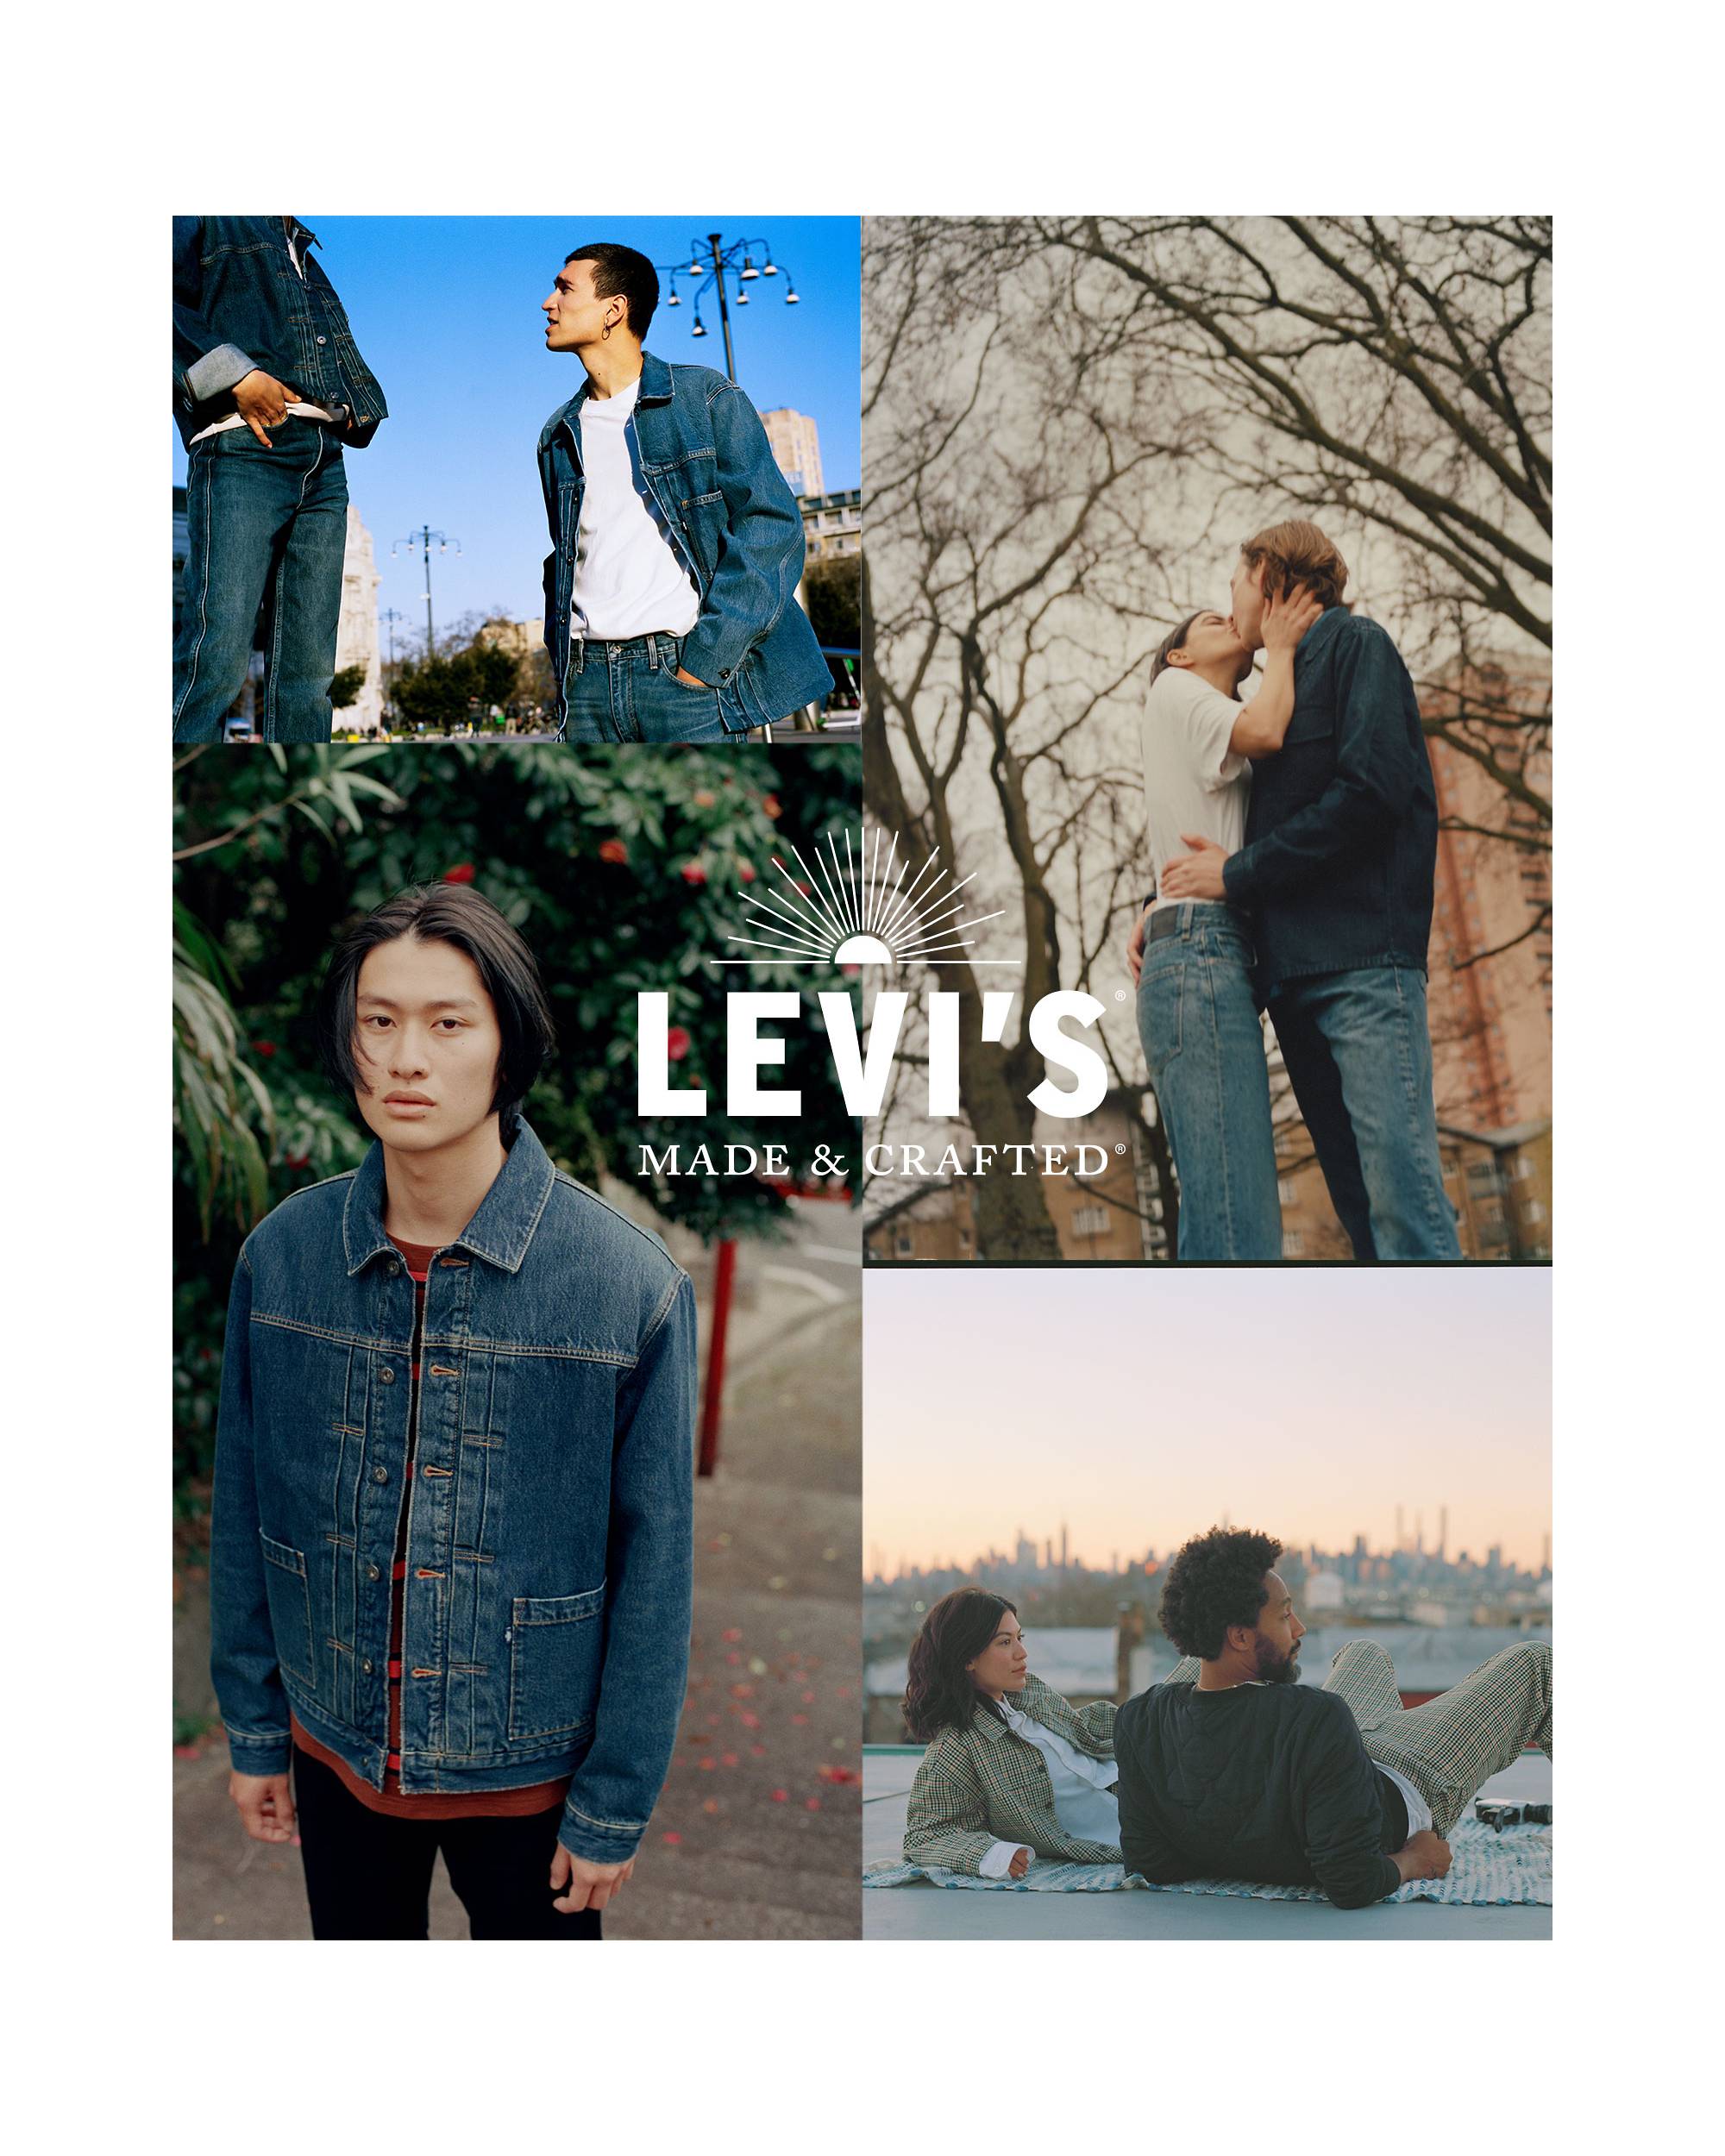 Models in different cities around the world wearing different Levi's jackets